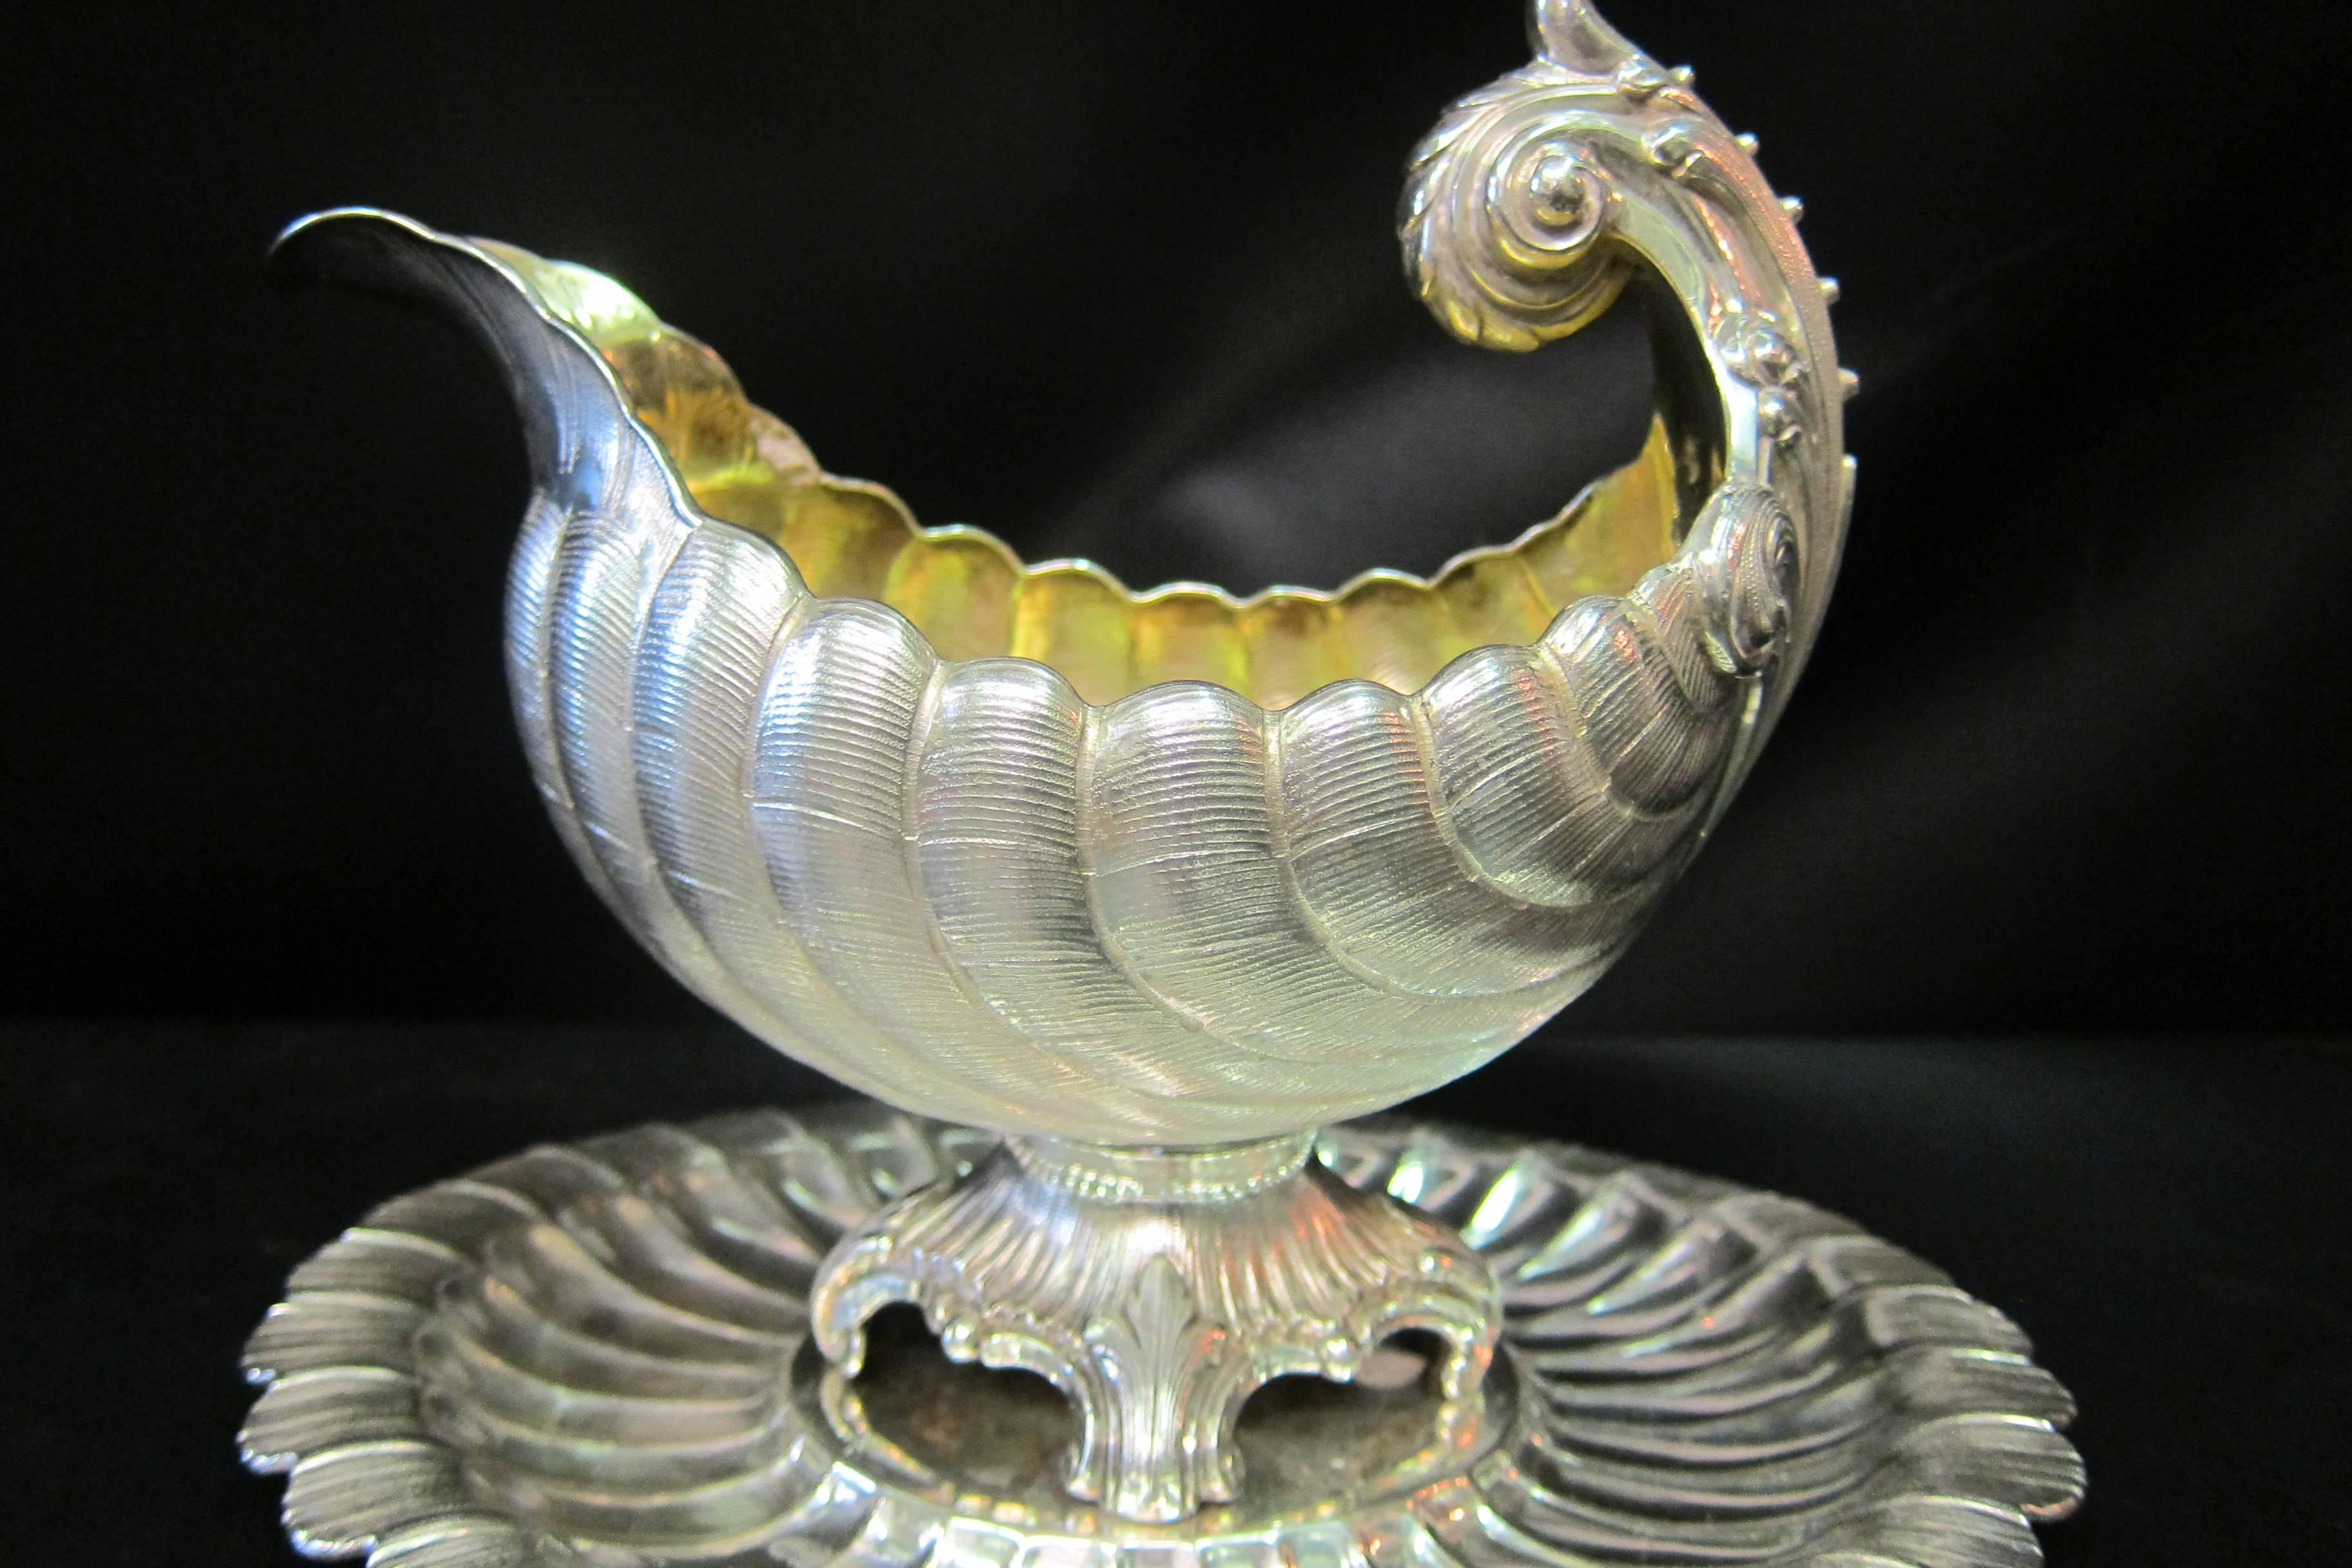 Circa late 19th century, German silversmith, Lazarus Posen, designed this stunning stylized shell sauce boat featuring a hand rendered textured scallop pattern. Posen created this 800 silver piece commissioned by the Wilkens & Sohne company. The